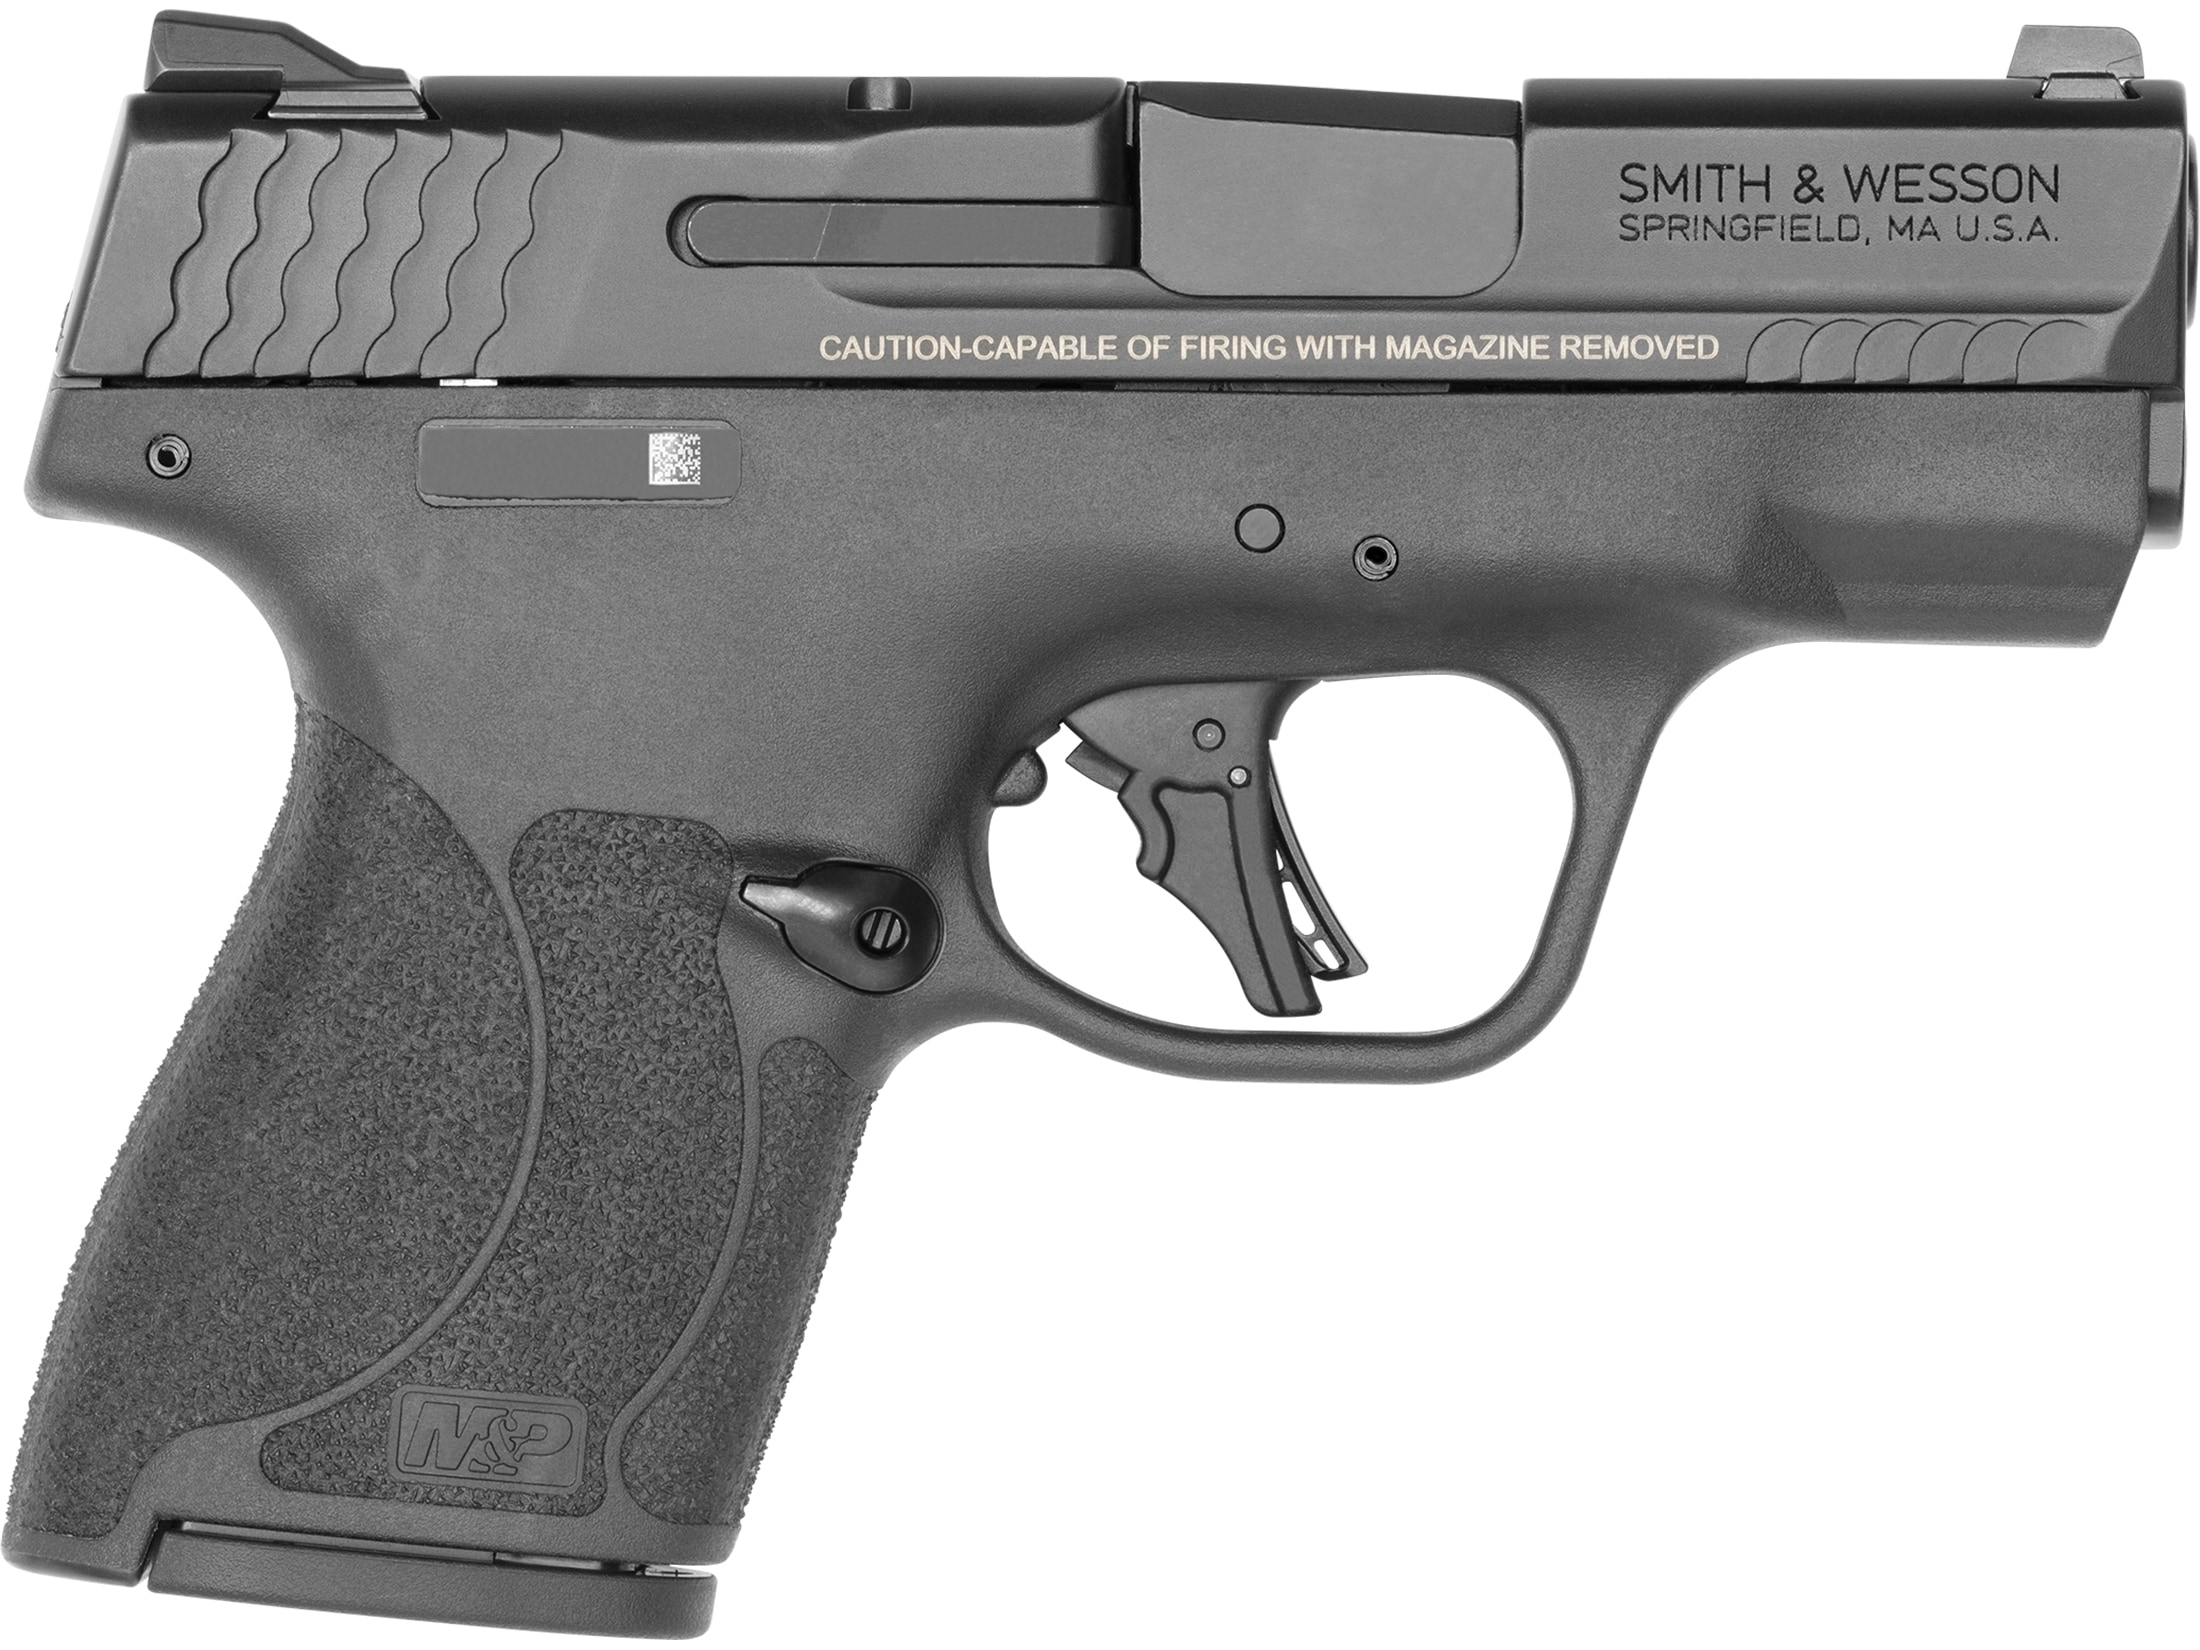 Smith & Wesson M&P 9 Shield Plus Semi-Automatic Pistol 9mm Luger 3.1" Barrel 10-Round Armornite Black with Thumb Safety